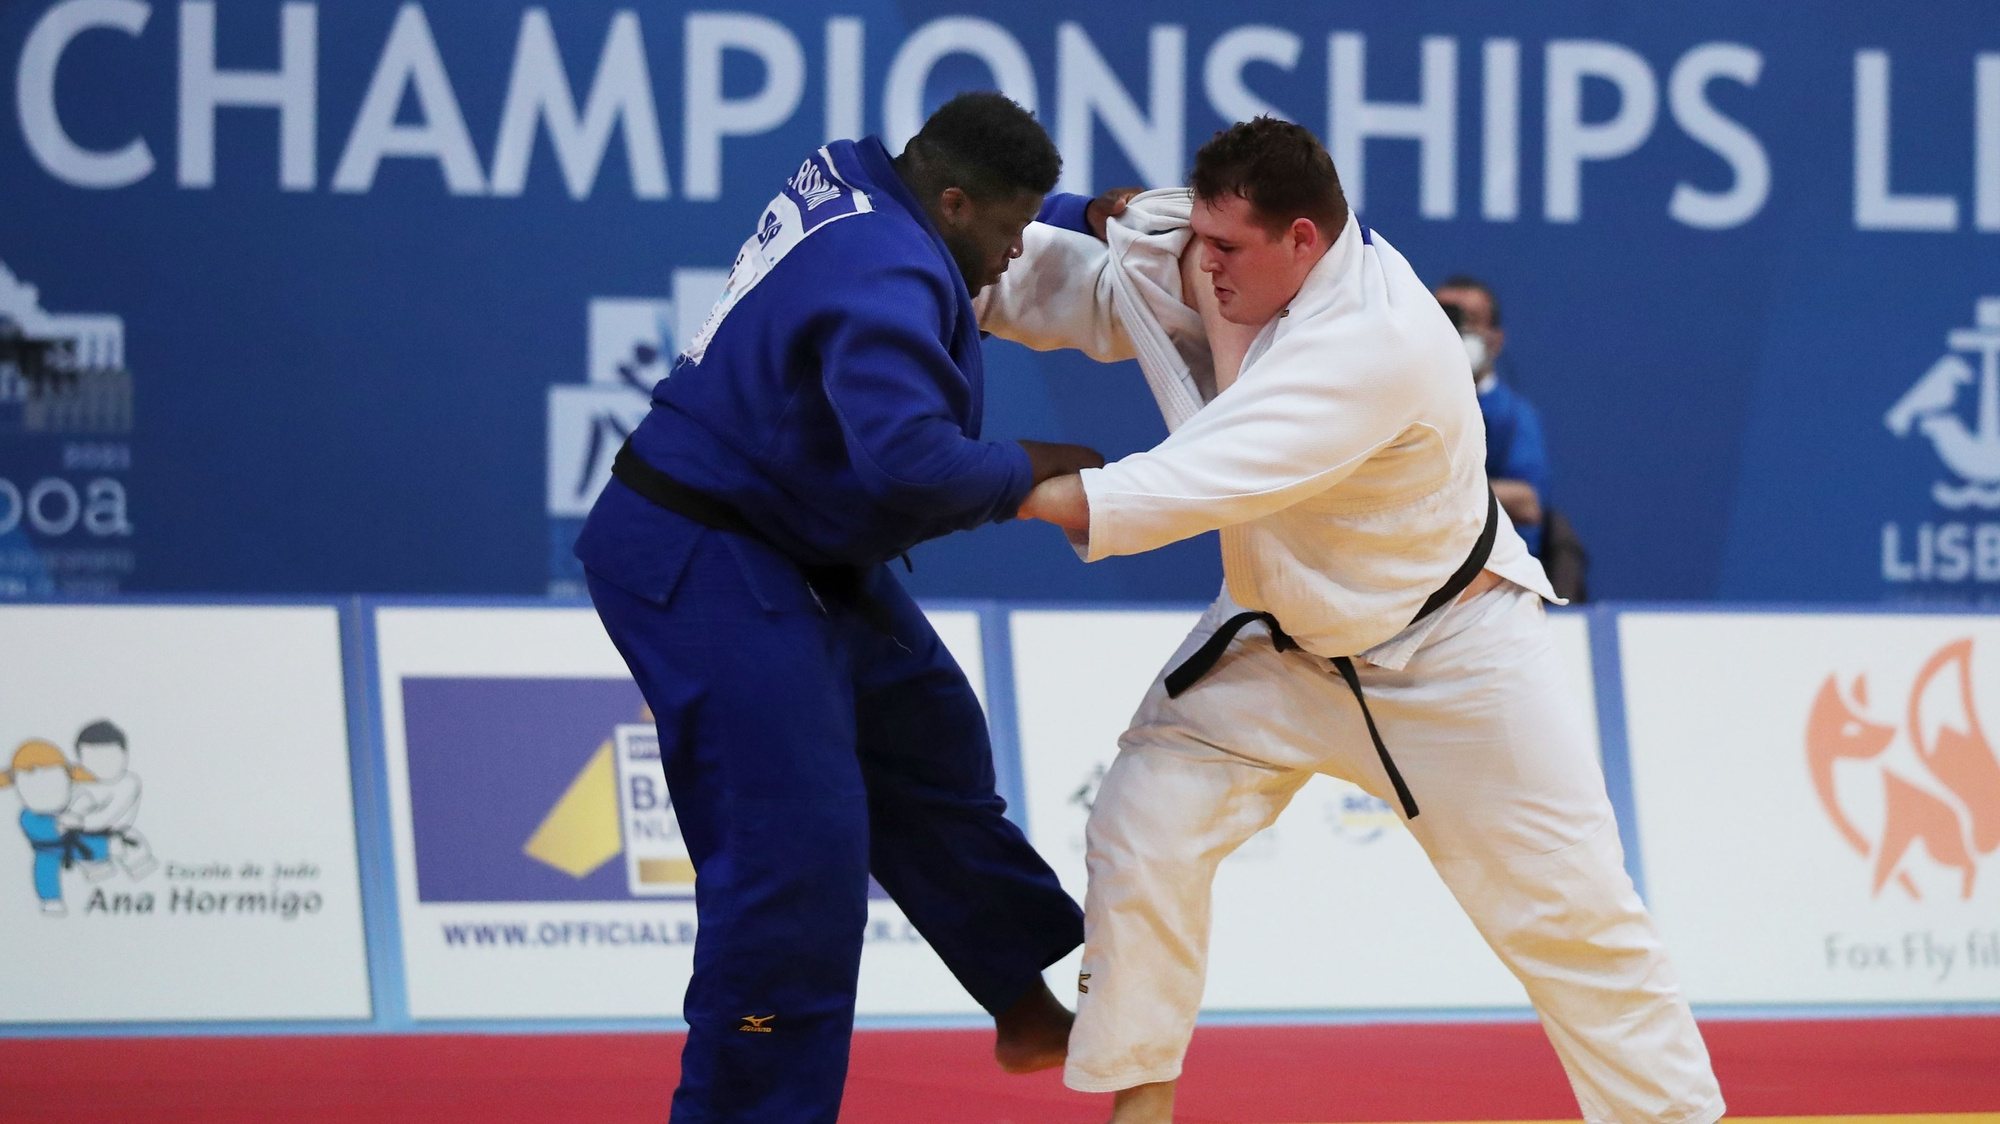 Vasco Rompão of Portugal (blue) and Jonas Schreiber of Germany (white) in action during the round one match in the men&#039;s +100kg category at the European Judo Championships in Lisbon, Portugal, 18 April 2021. NUNO VEIGA/LUSA